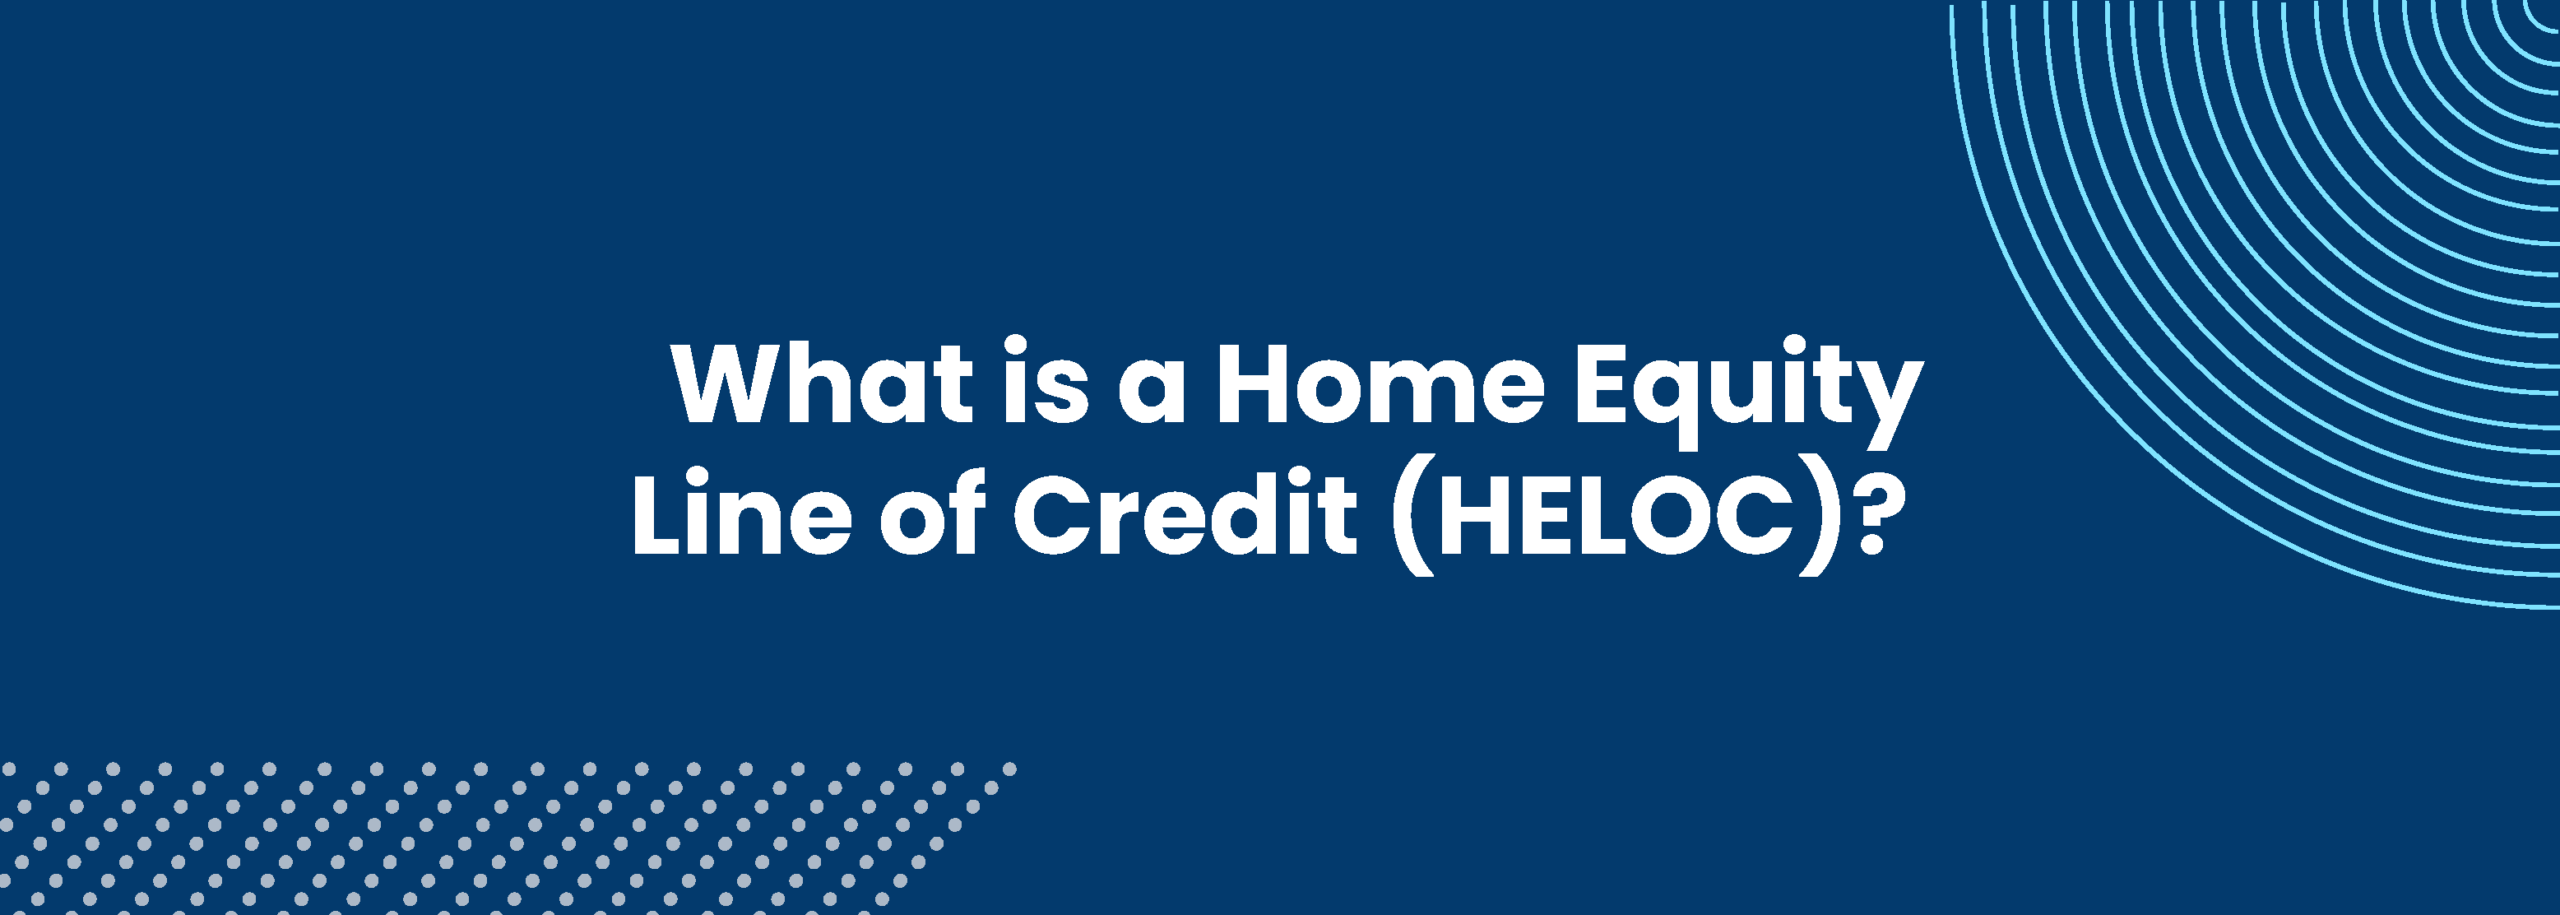 A home equity line of credit, or HELOC, is a form of revolving funds that allows you to borrow money against your home's value over time.